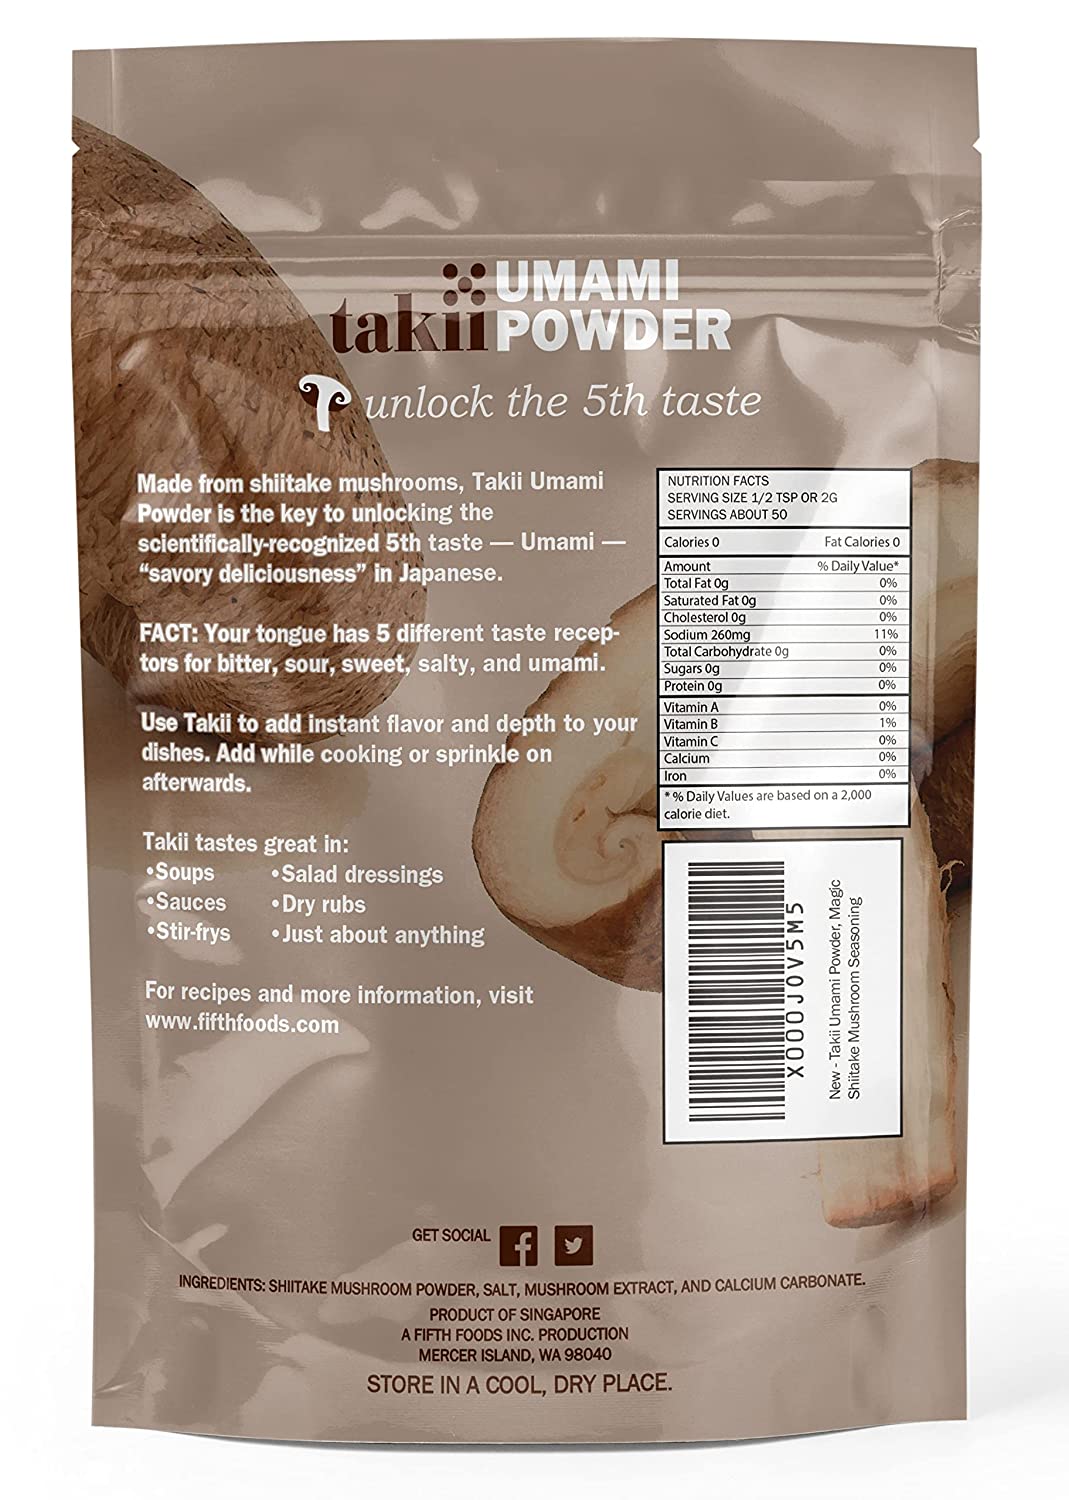 Takii Umami Powder, Made from Shiitake Mushrooms, Add Instant Flavor and Depth to All Your Favorite Dishes (1 Pack - 3.5 Ounce Pouch)